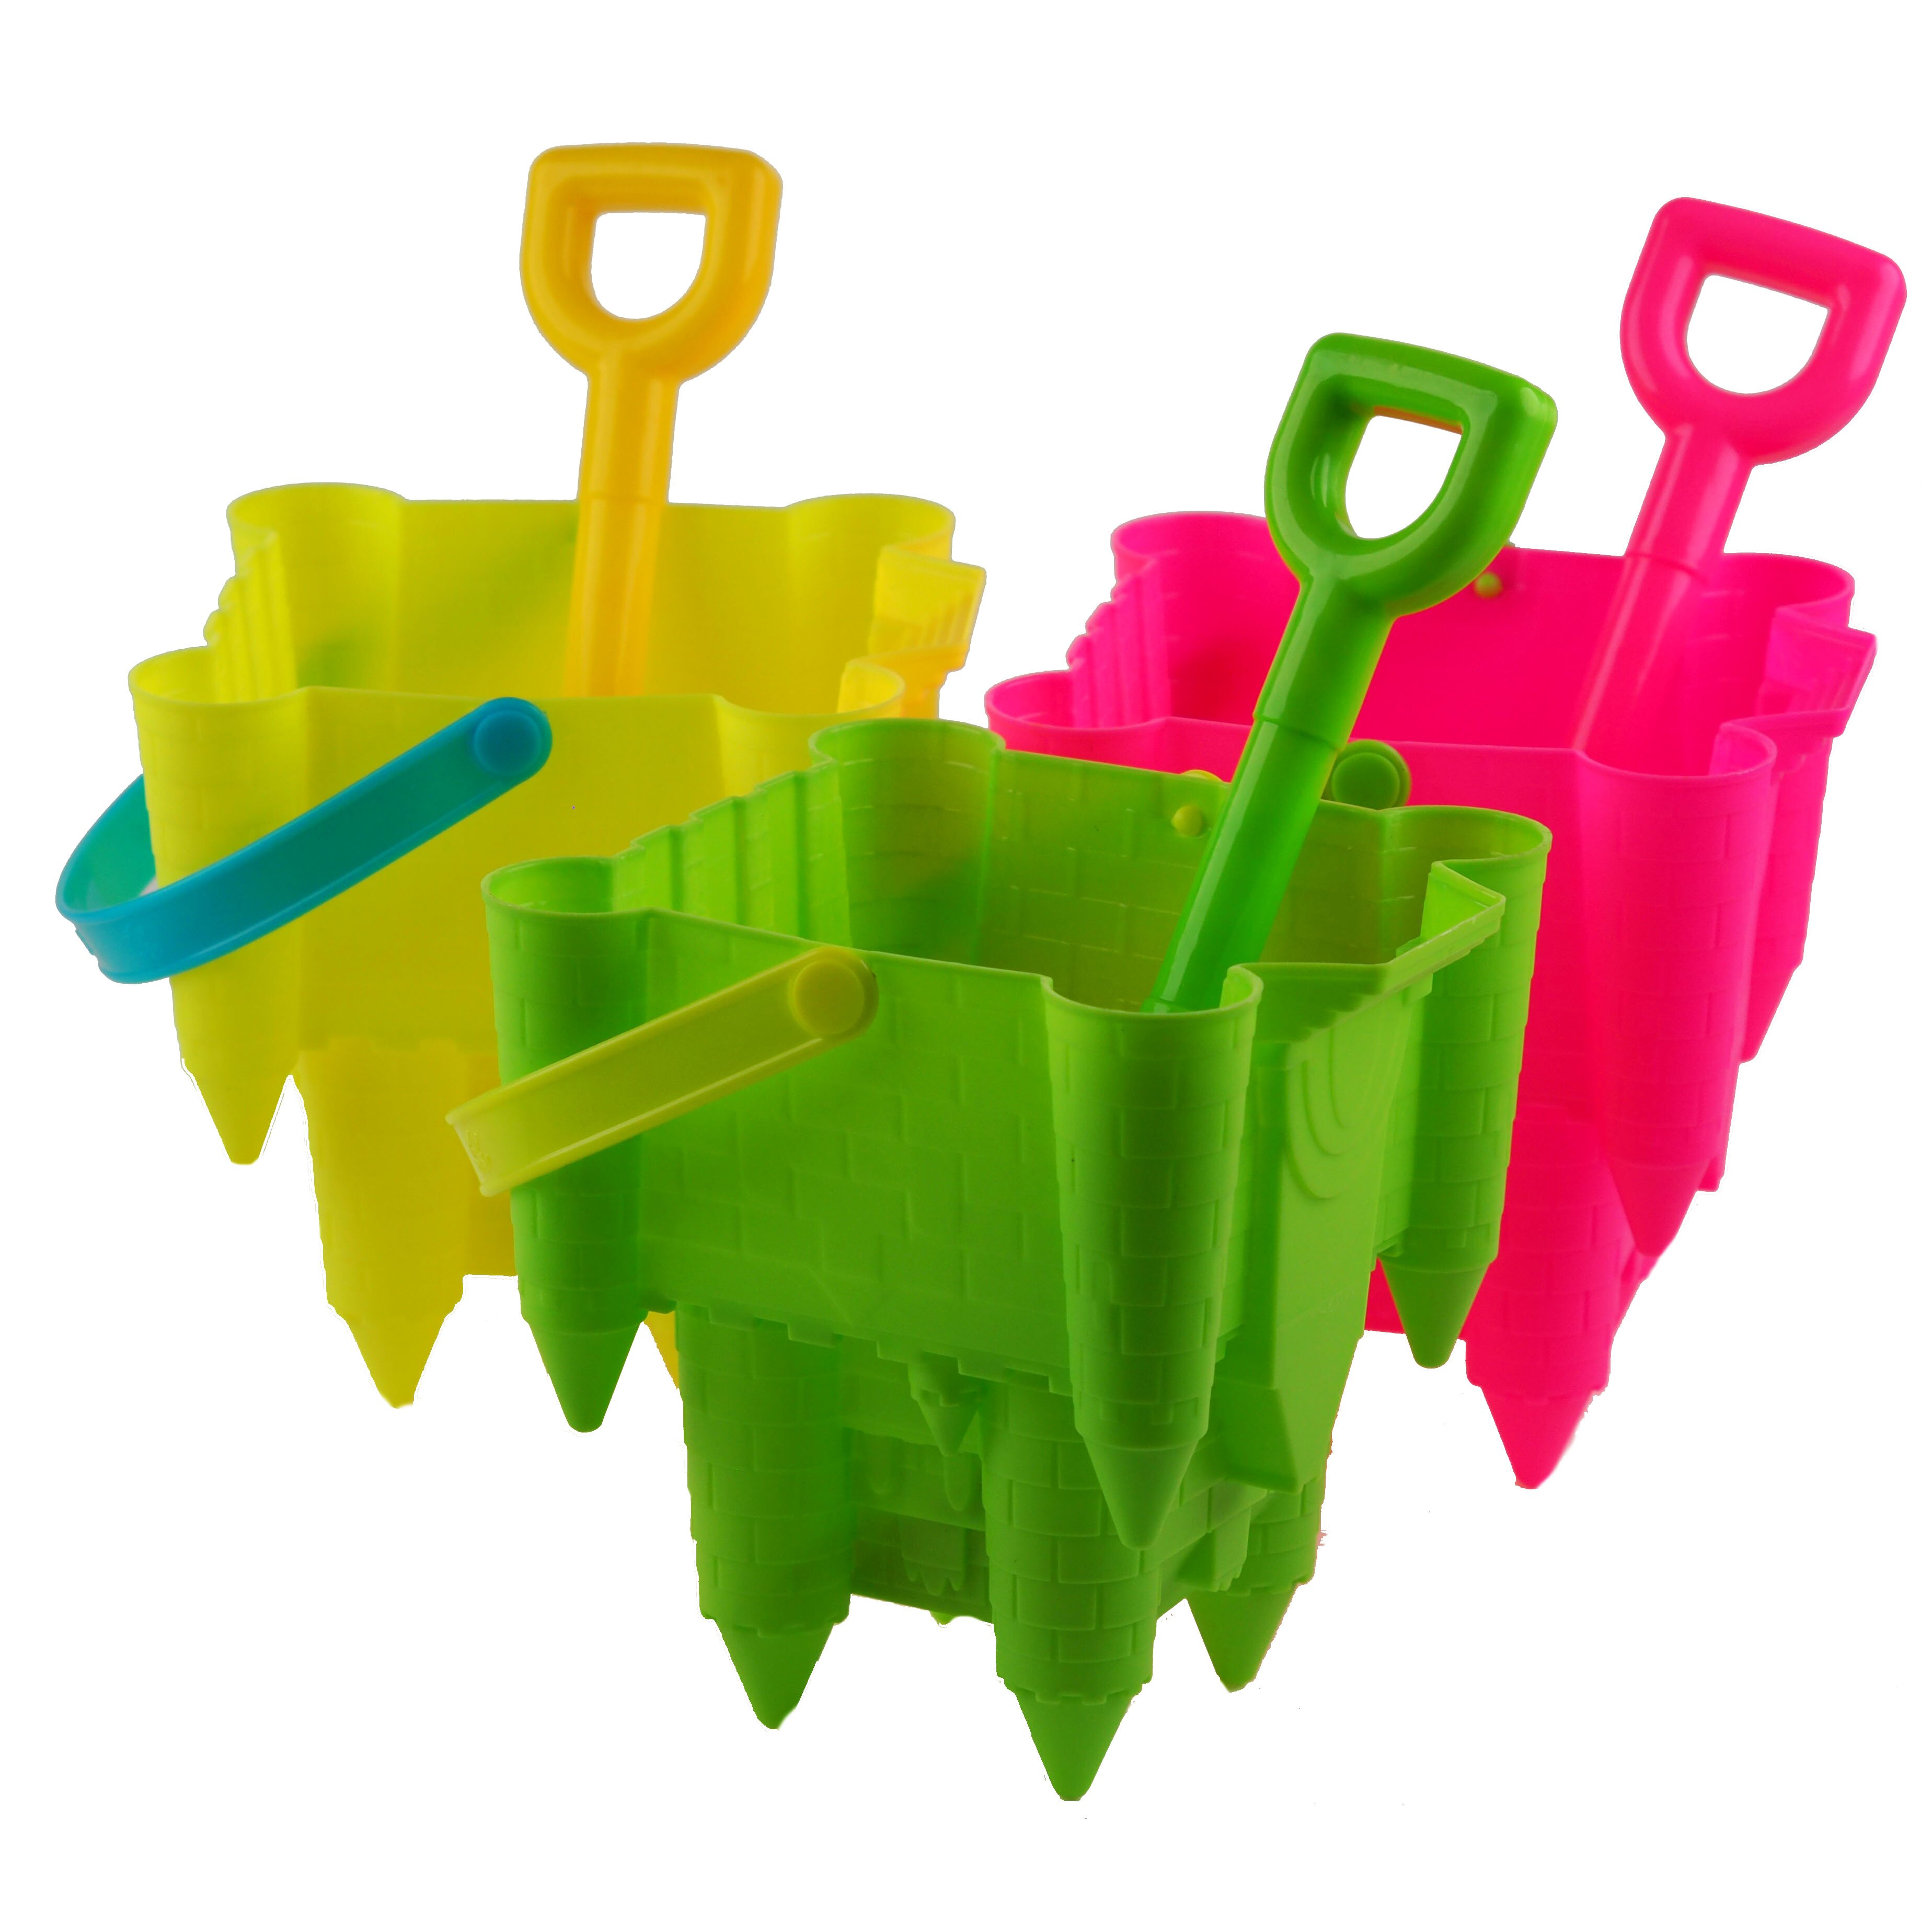 Sand Castle Shaped Bucket And Spade - Pink Yellow Green (Set of 3)